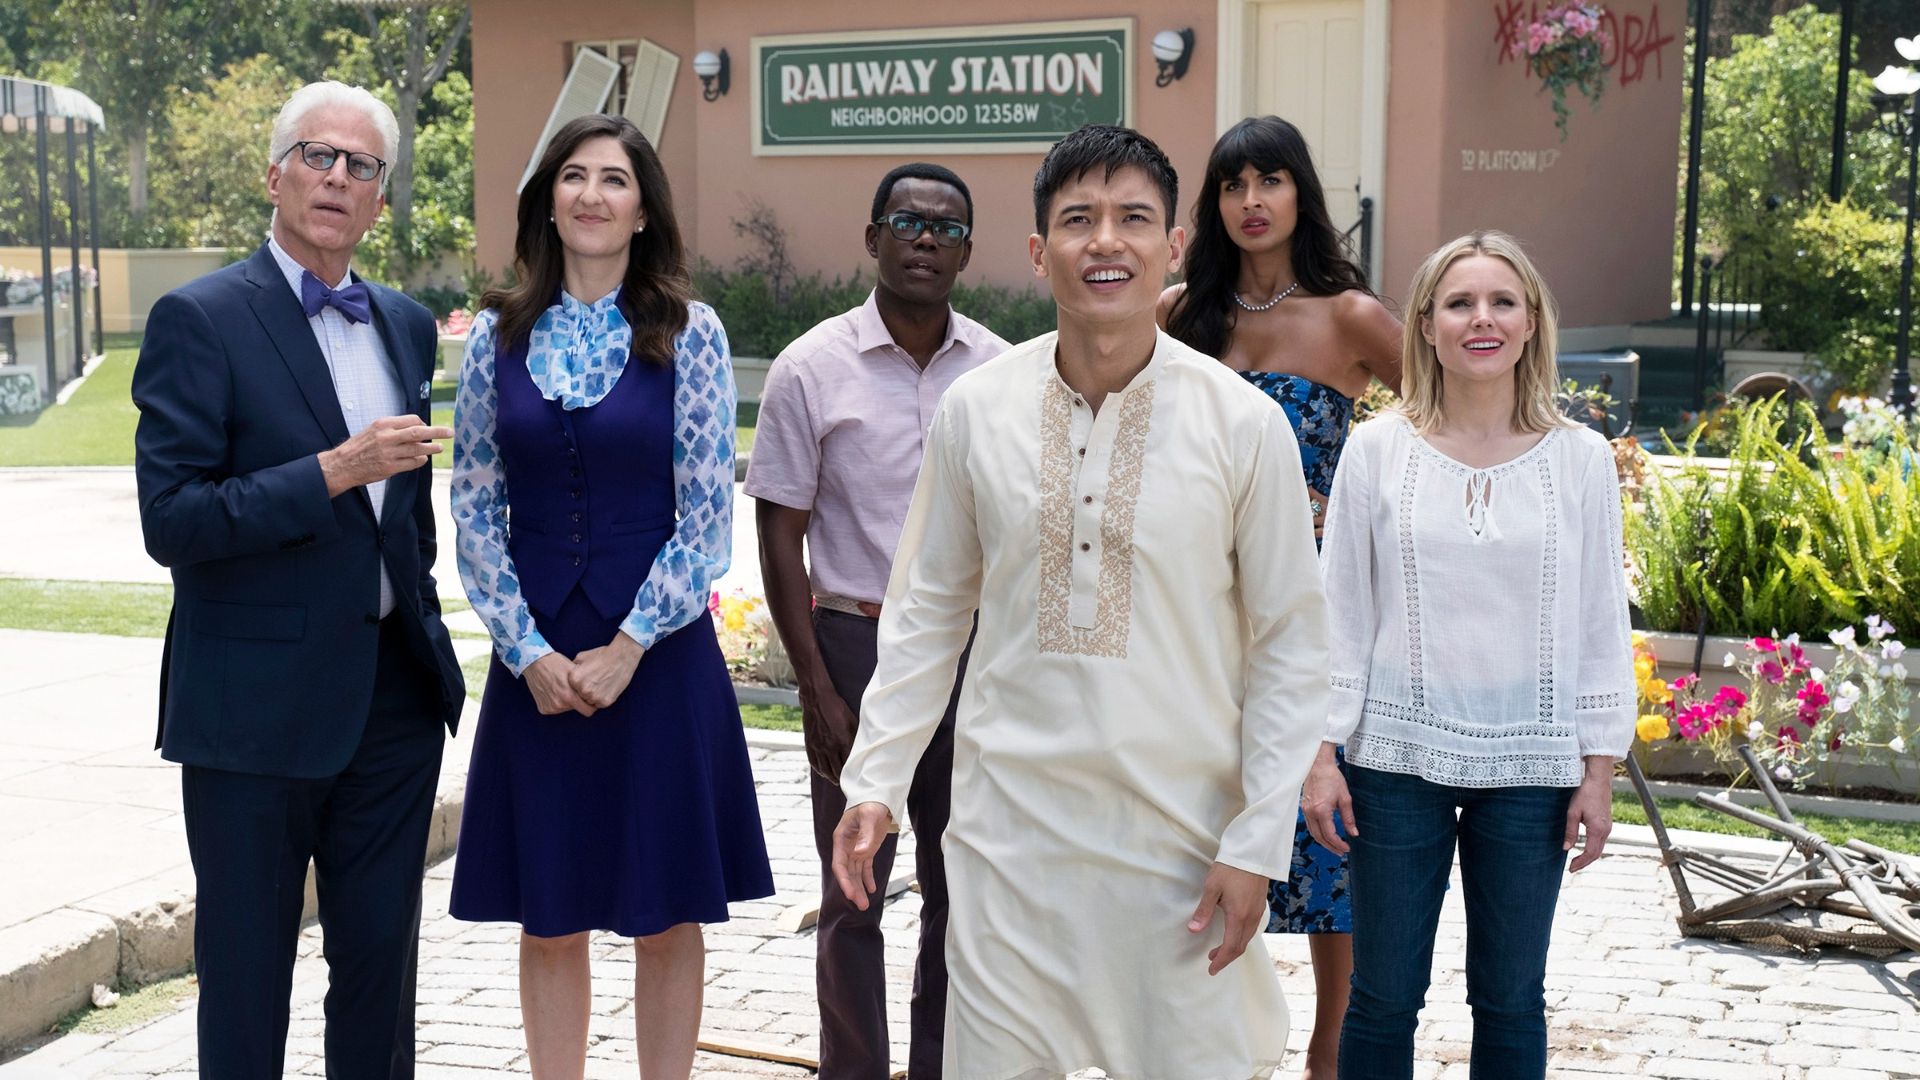 The Good Place – one of the best Netflix shows to watch right now